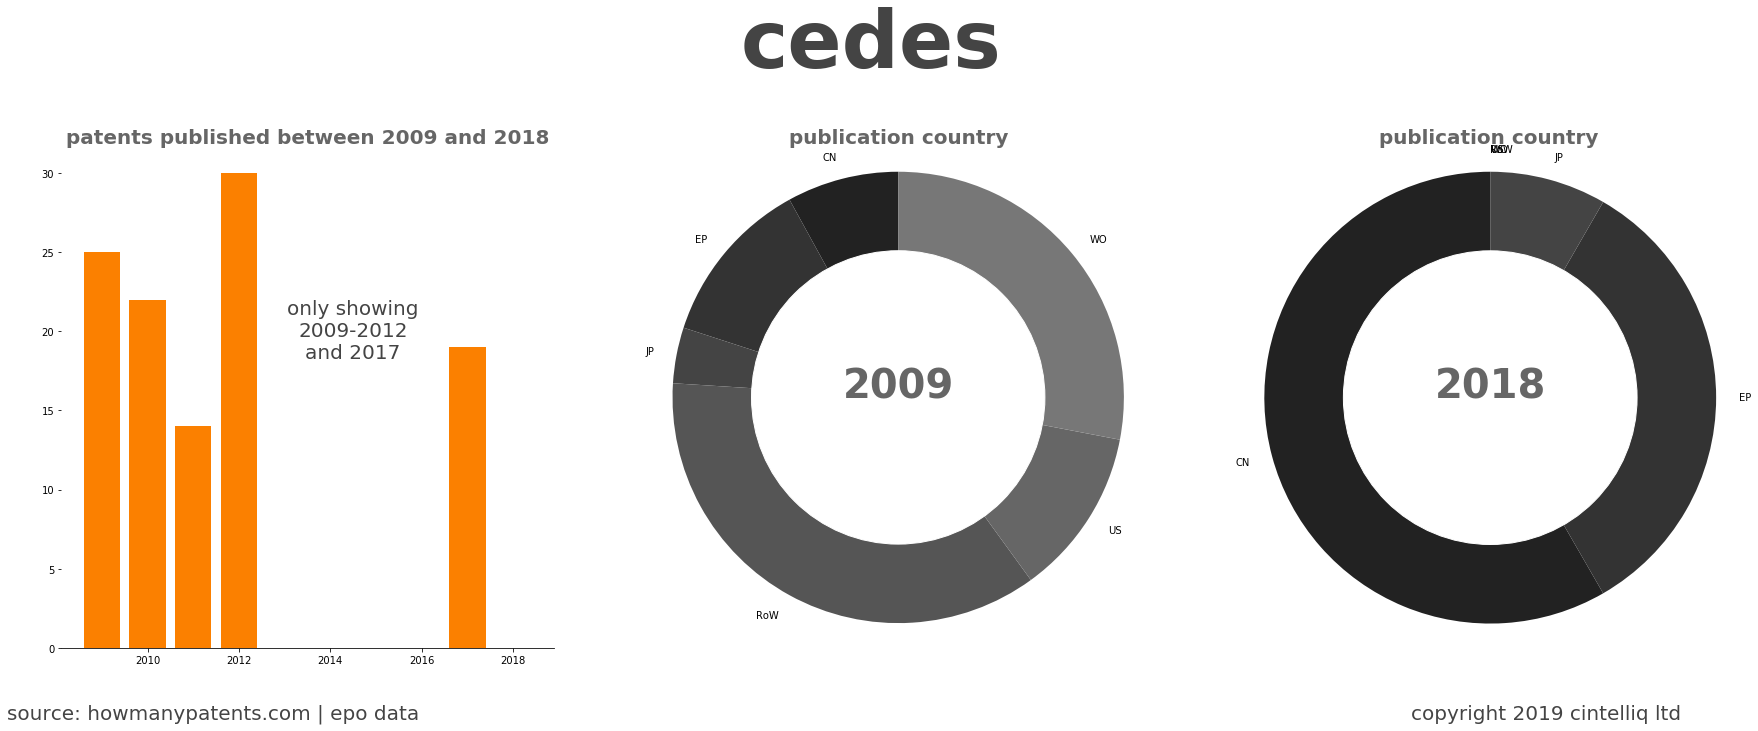 summary of patents for Cedes